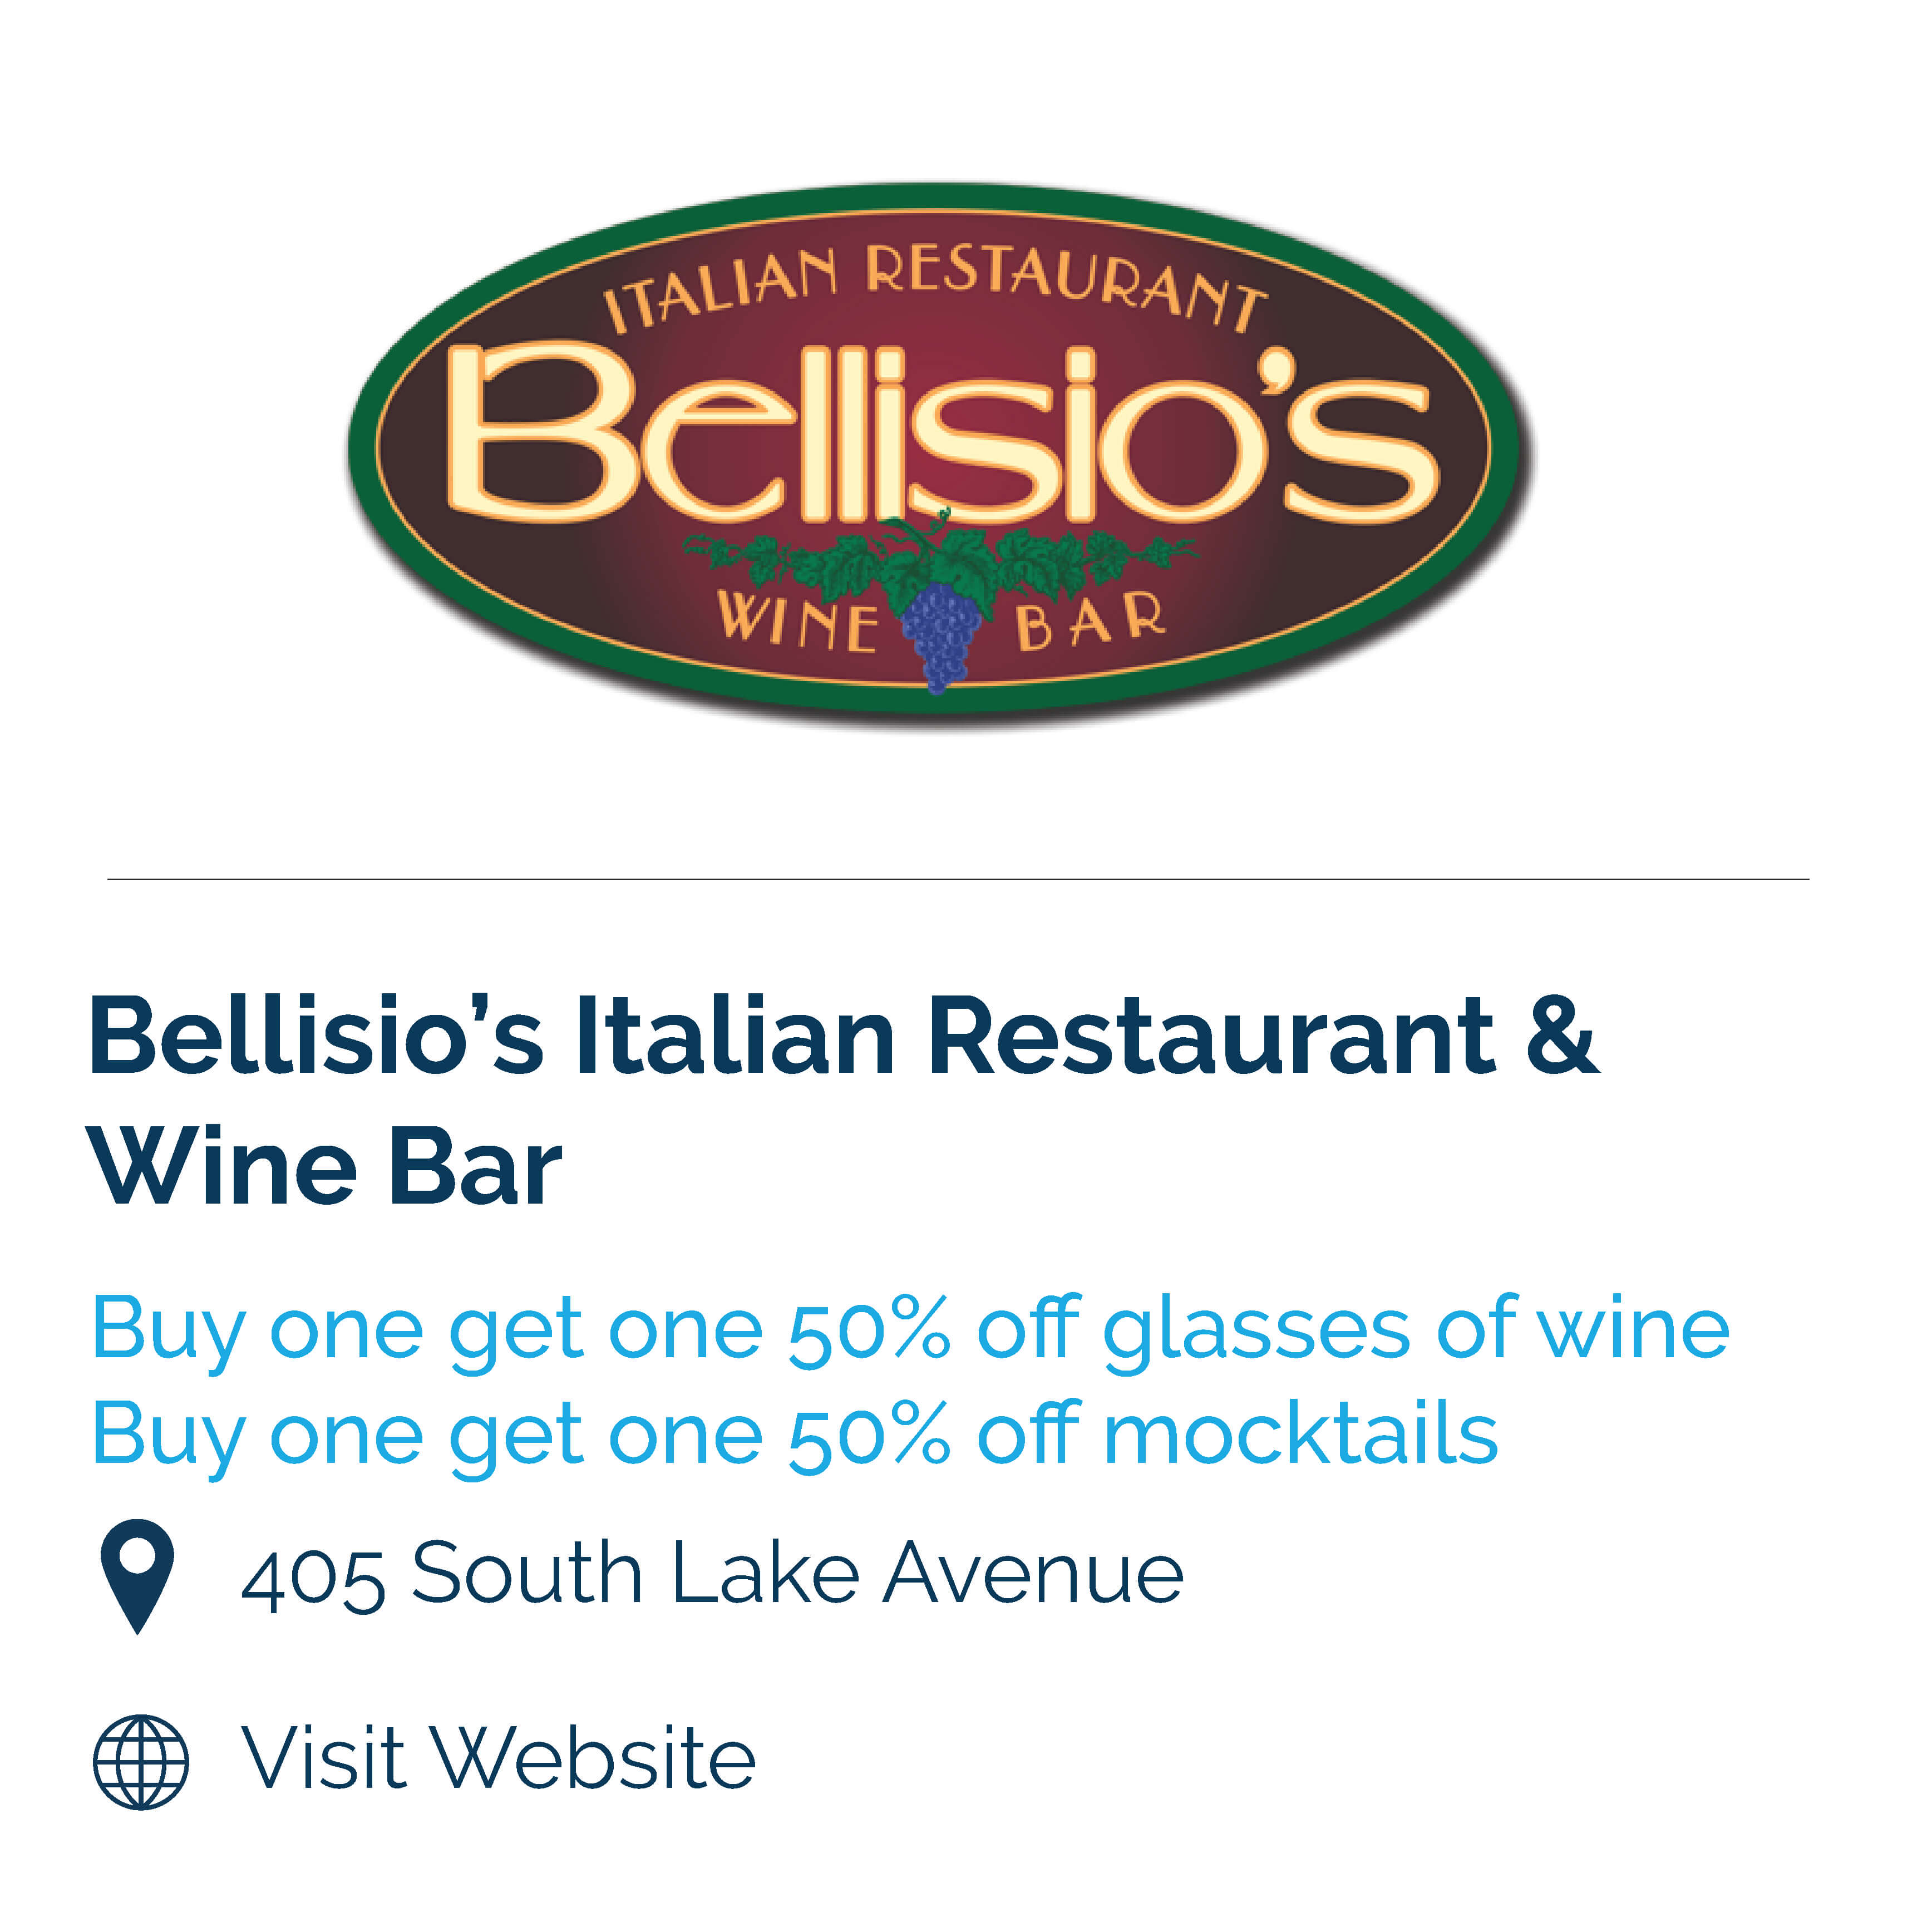 bellisios italian restaurant and wine bar. buy one get one 50% off glasses of wine. buy one get one 50% off mocktails. 405 south lake ave